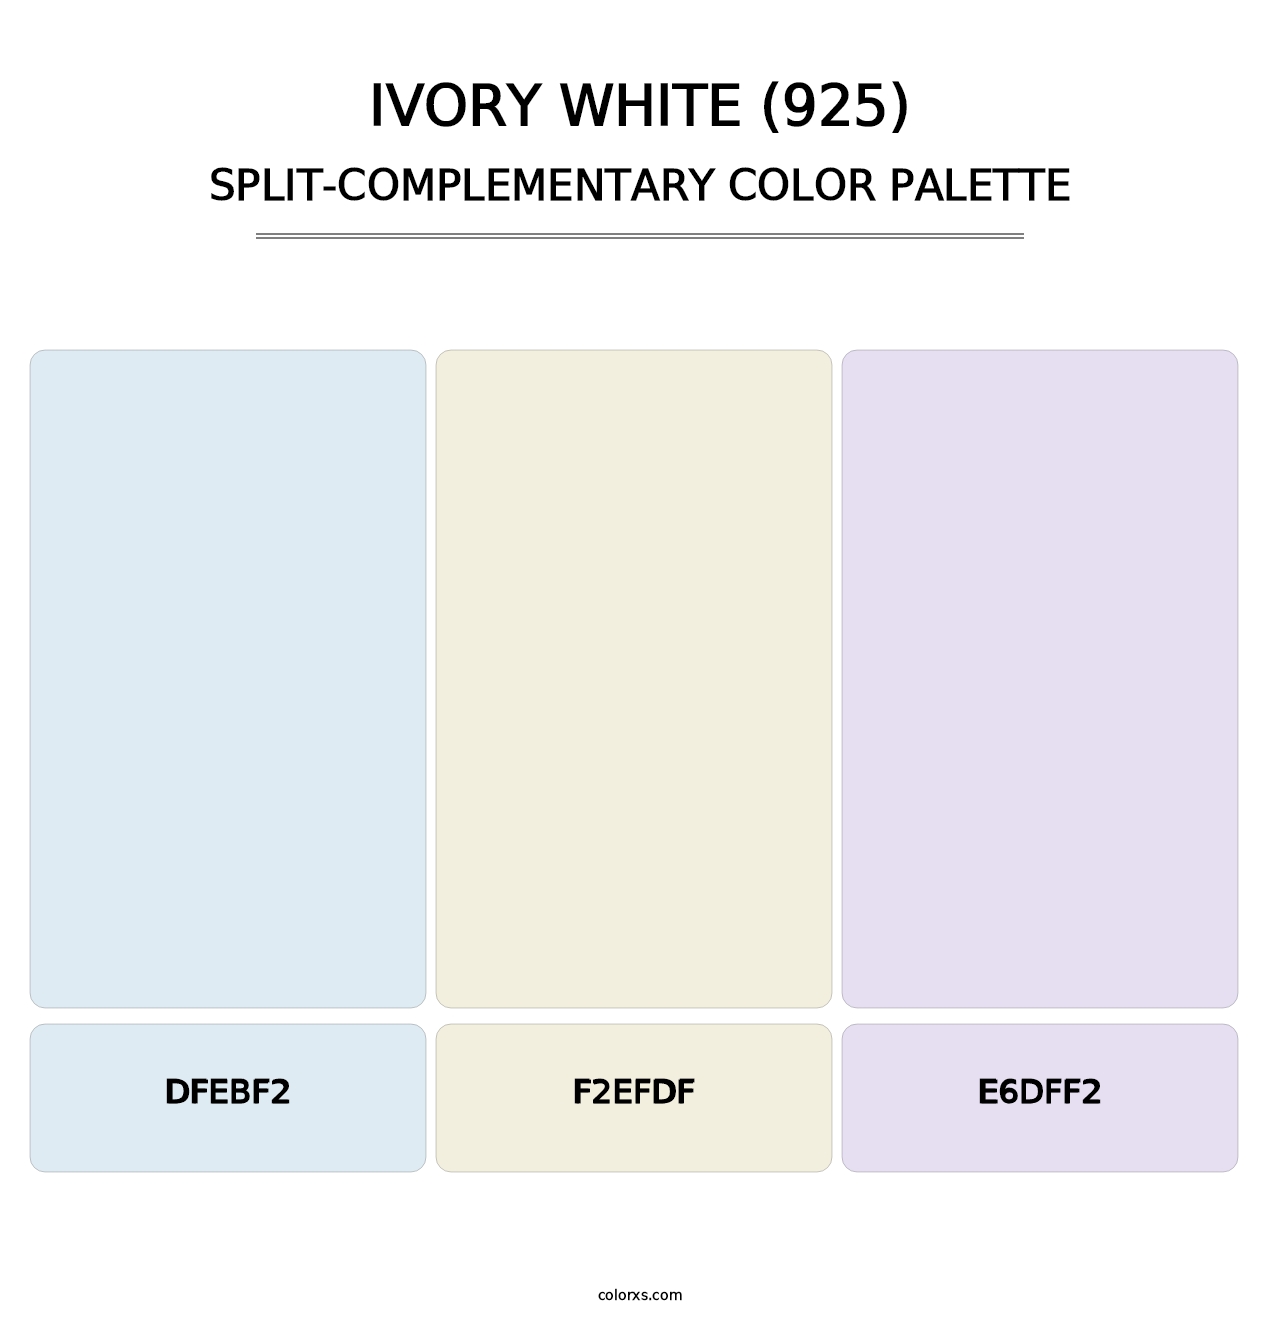 Ivory White (925) - Split-Complementary Color Palette